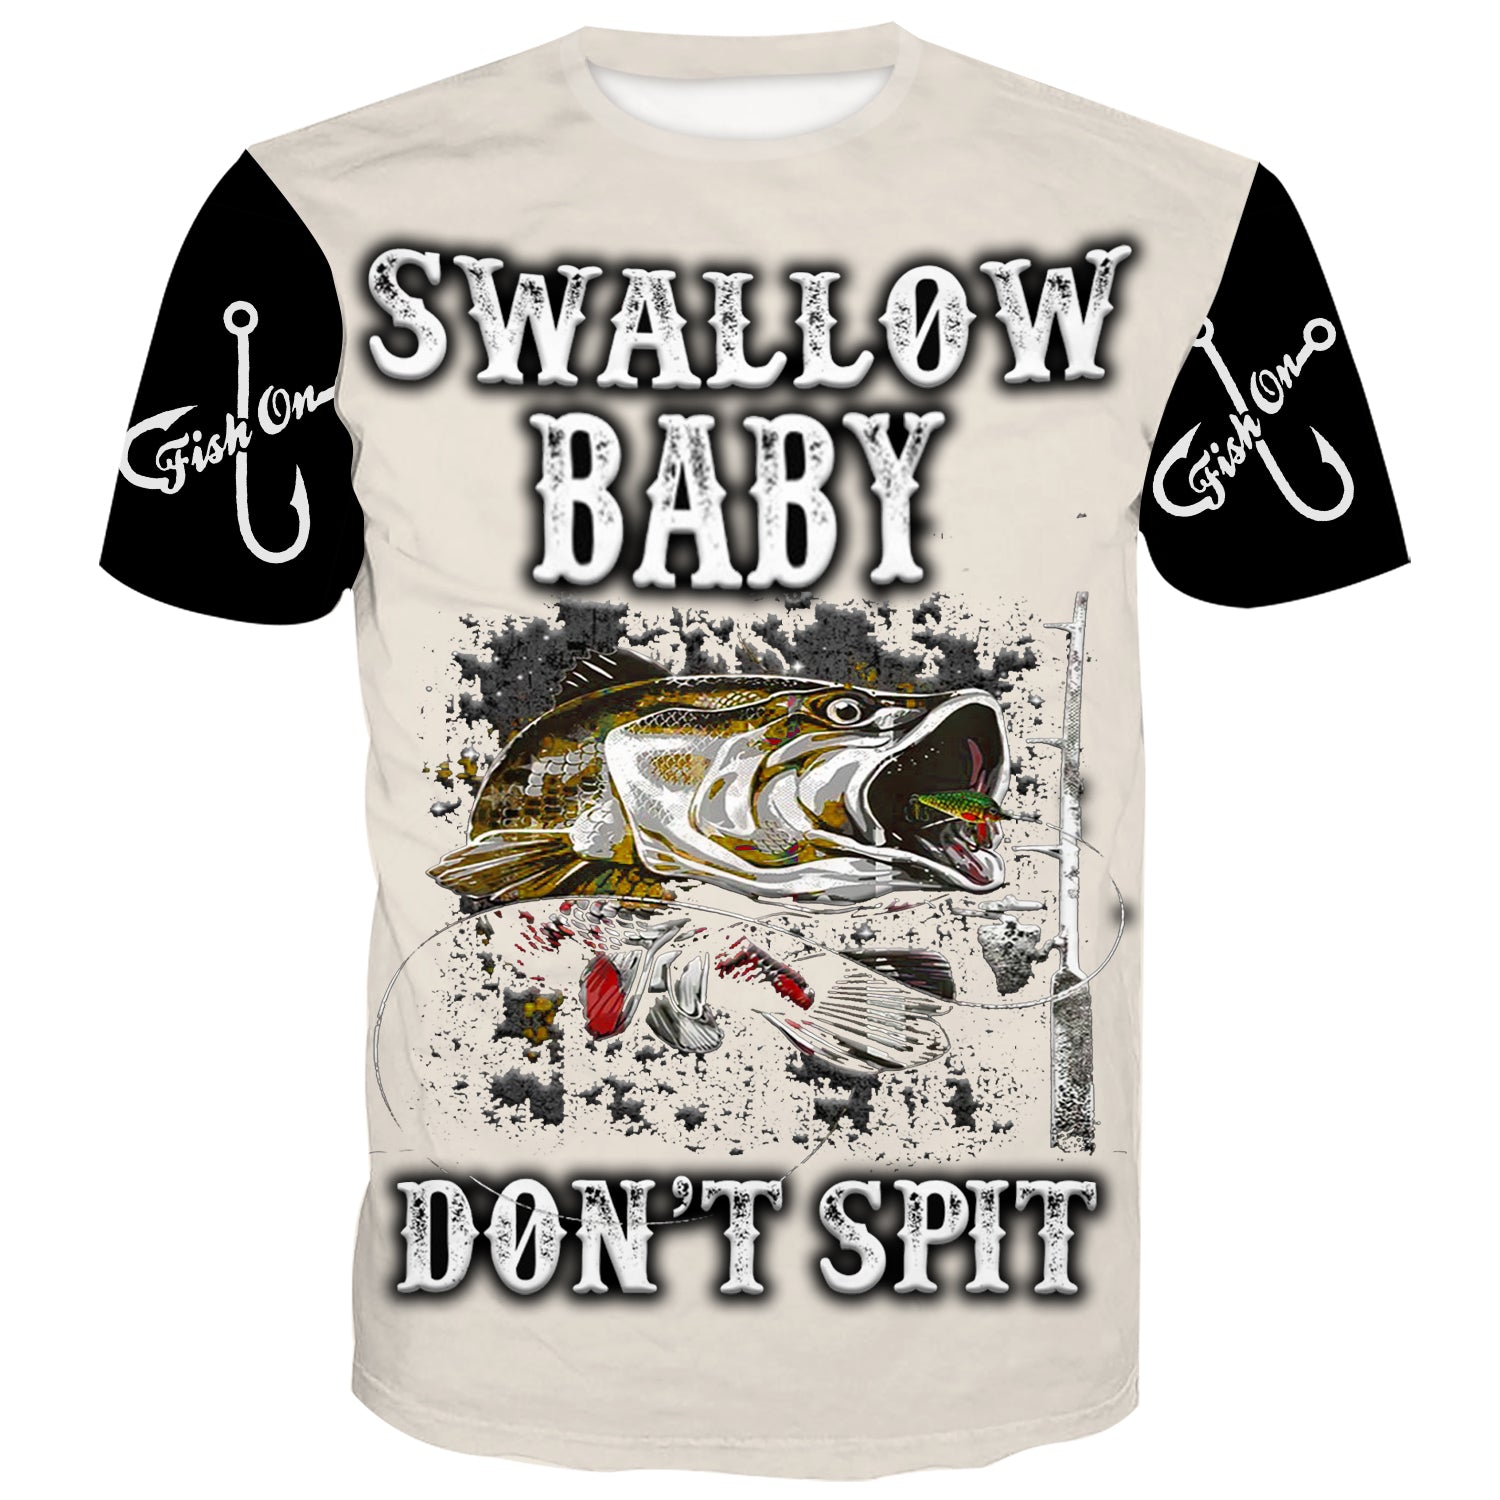 Swallow Baby, Don't Spit - Multiple Light Color T-Shirts